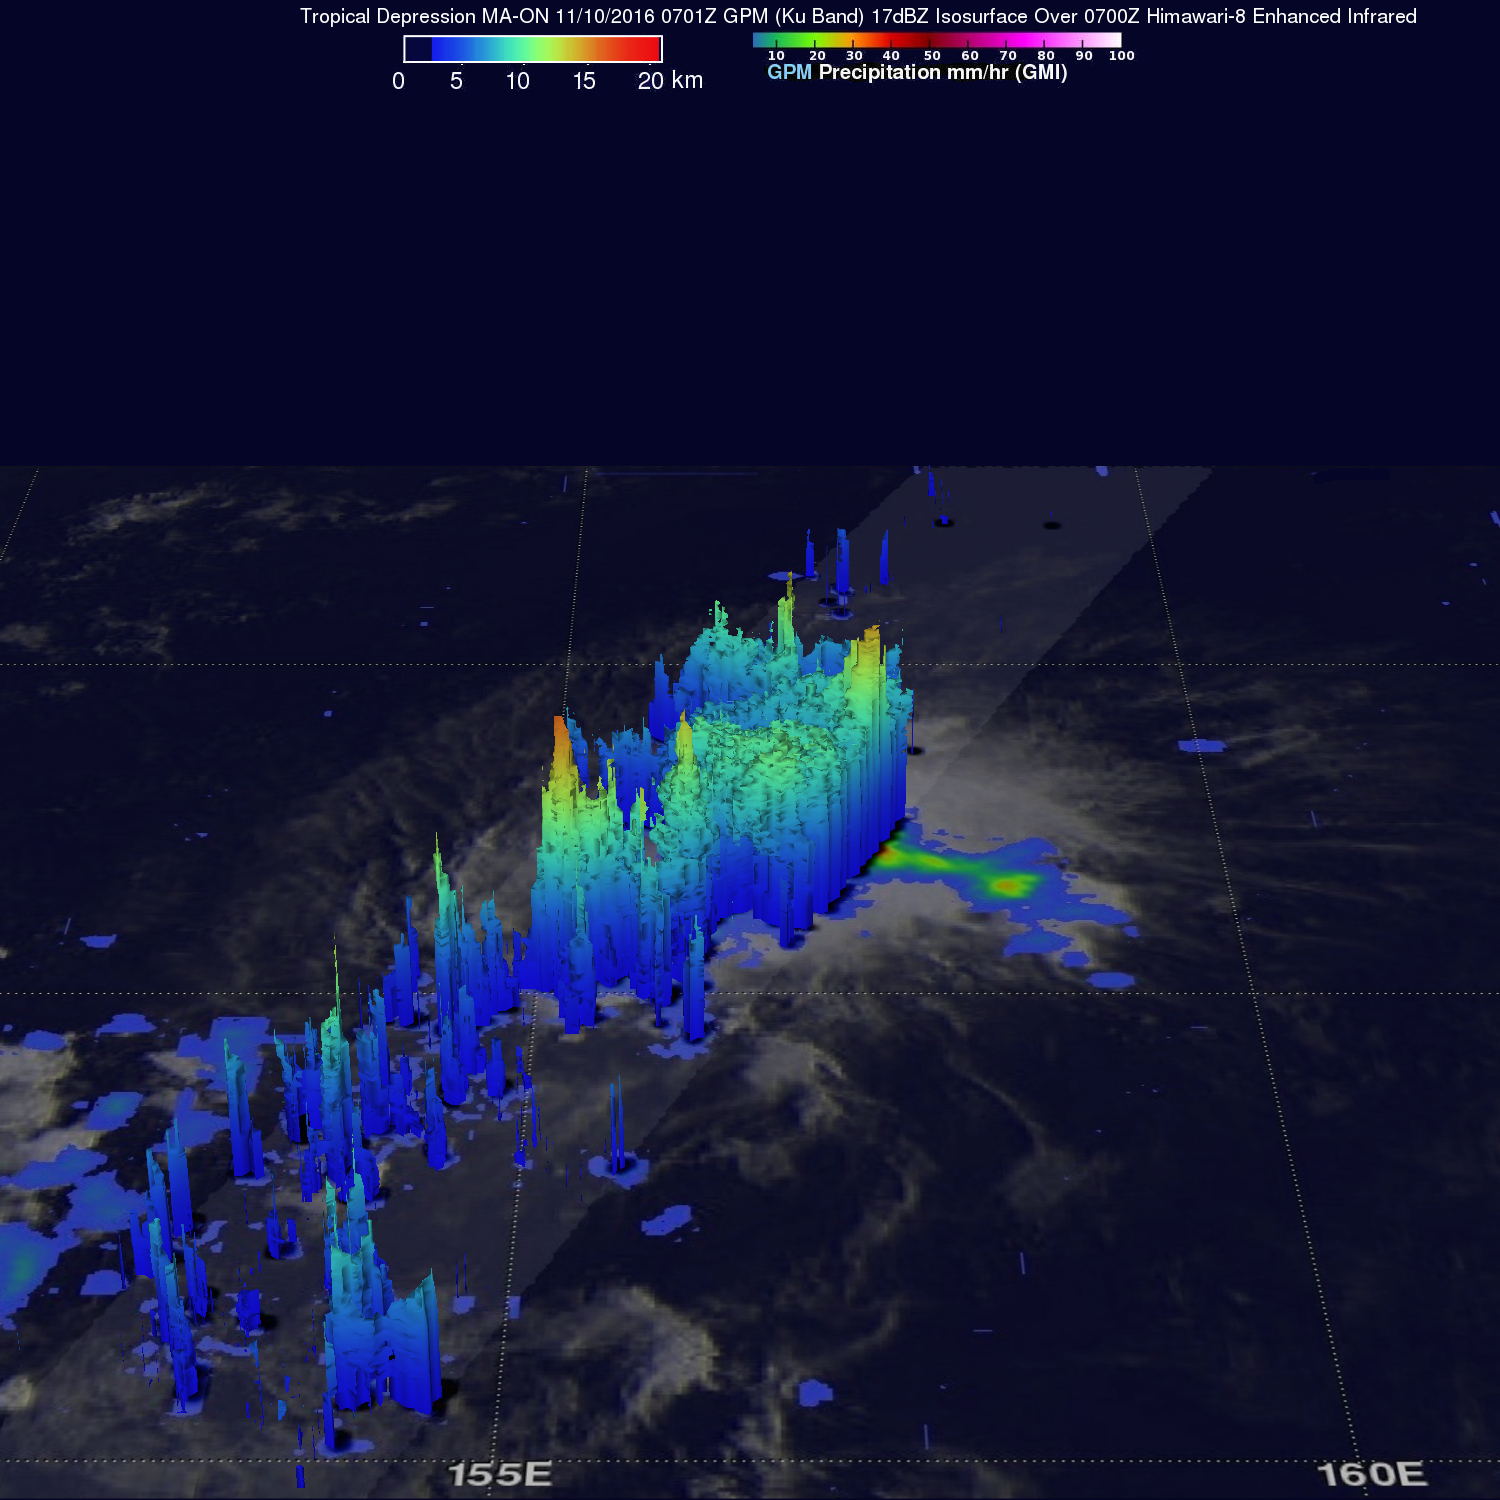 Tropical Depression MA-ON Evaluated With GPM Data